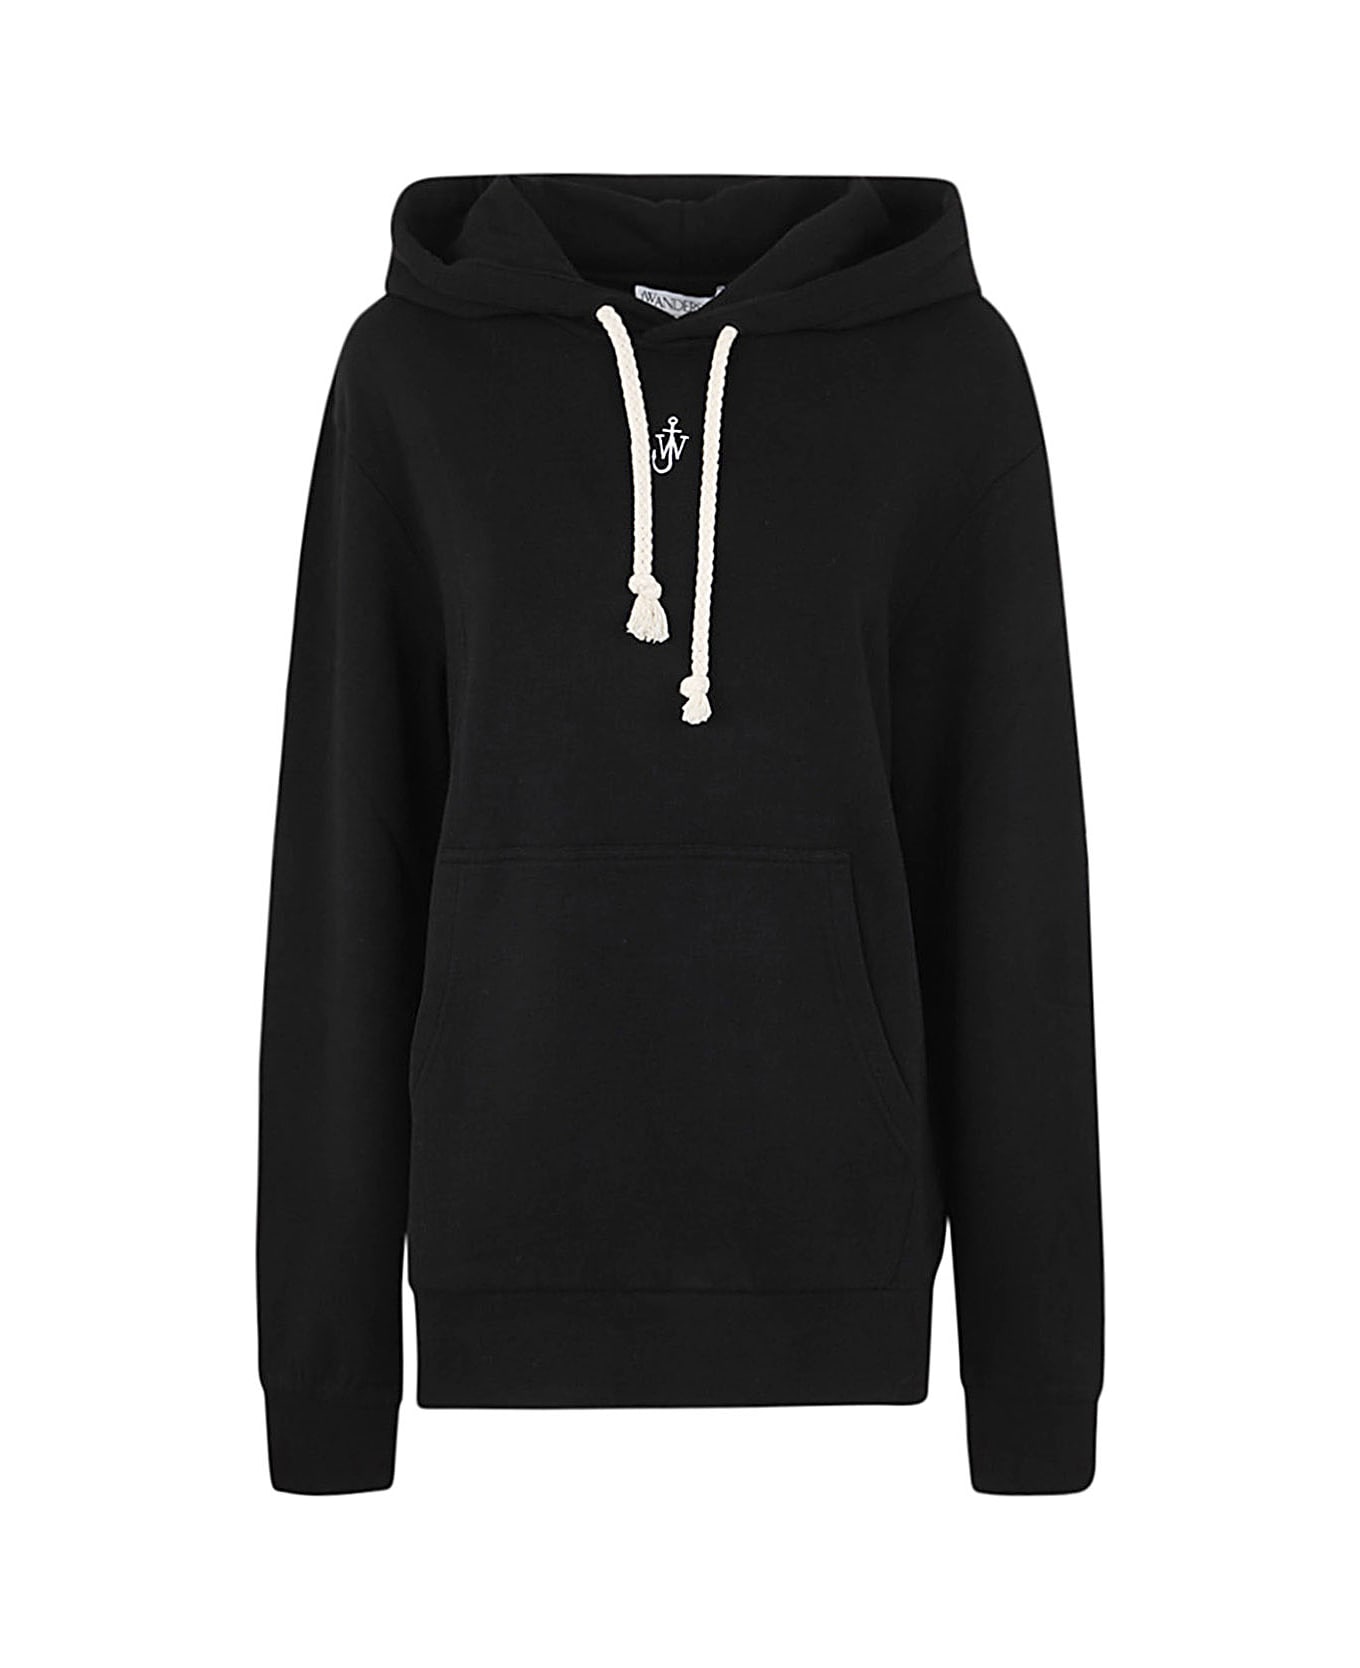 J.W. Anderson Anchor Embroidery Hoodie - Black